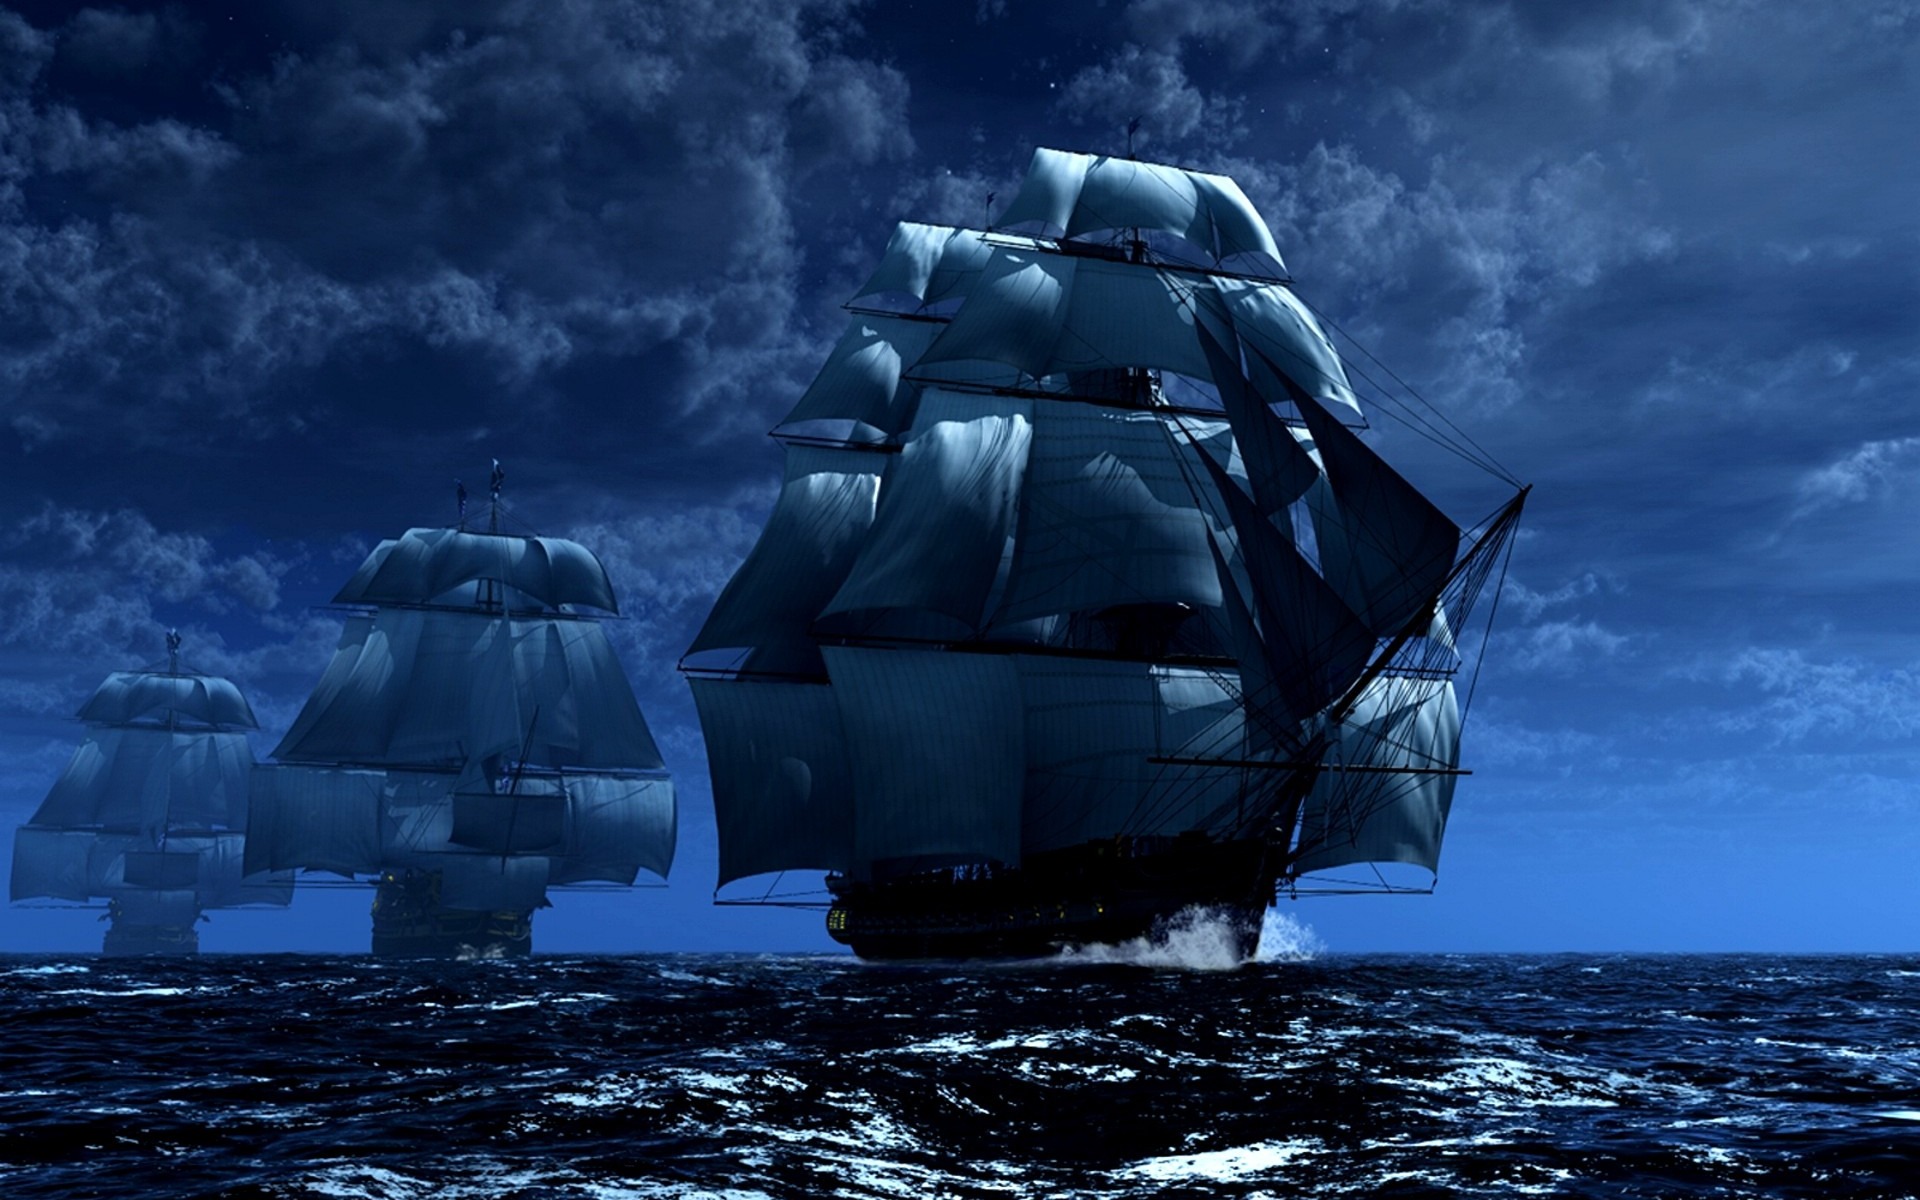 The sailing ships wallpapers and images   wallpapers pictures photos